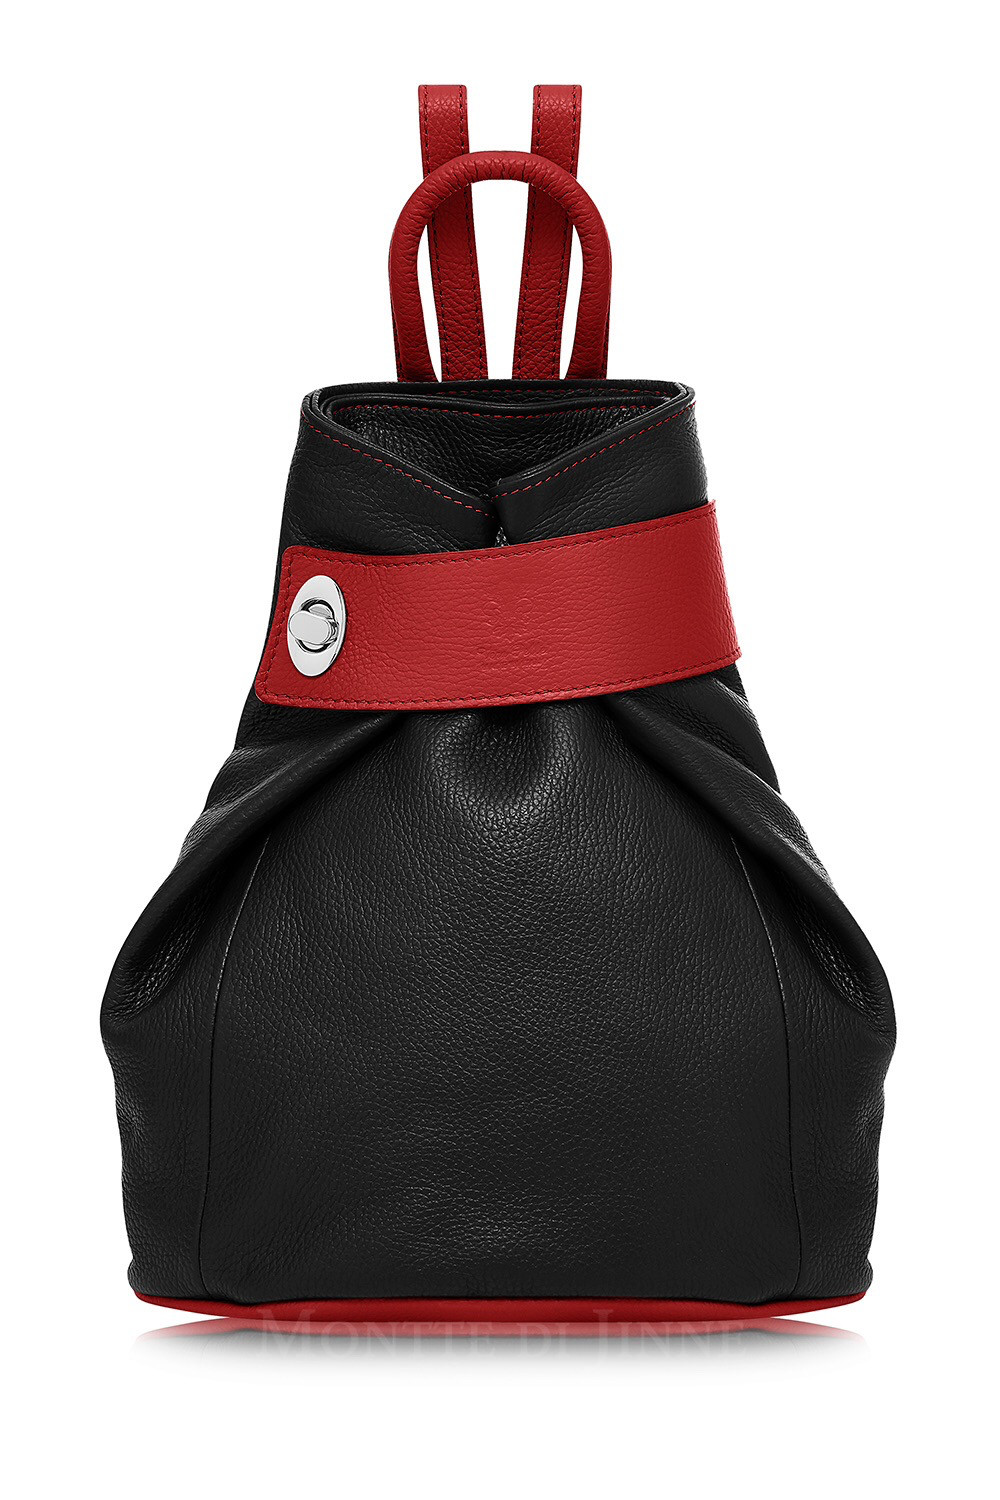 Black Body With Red Trim Lock Backpack 